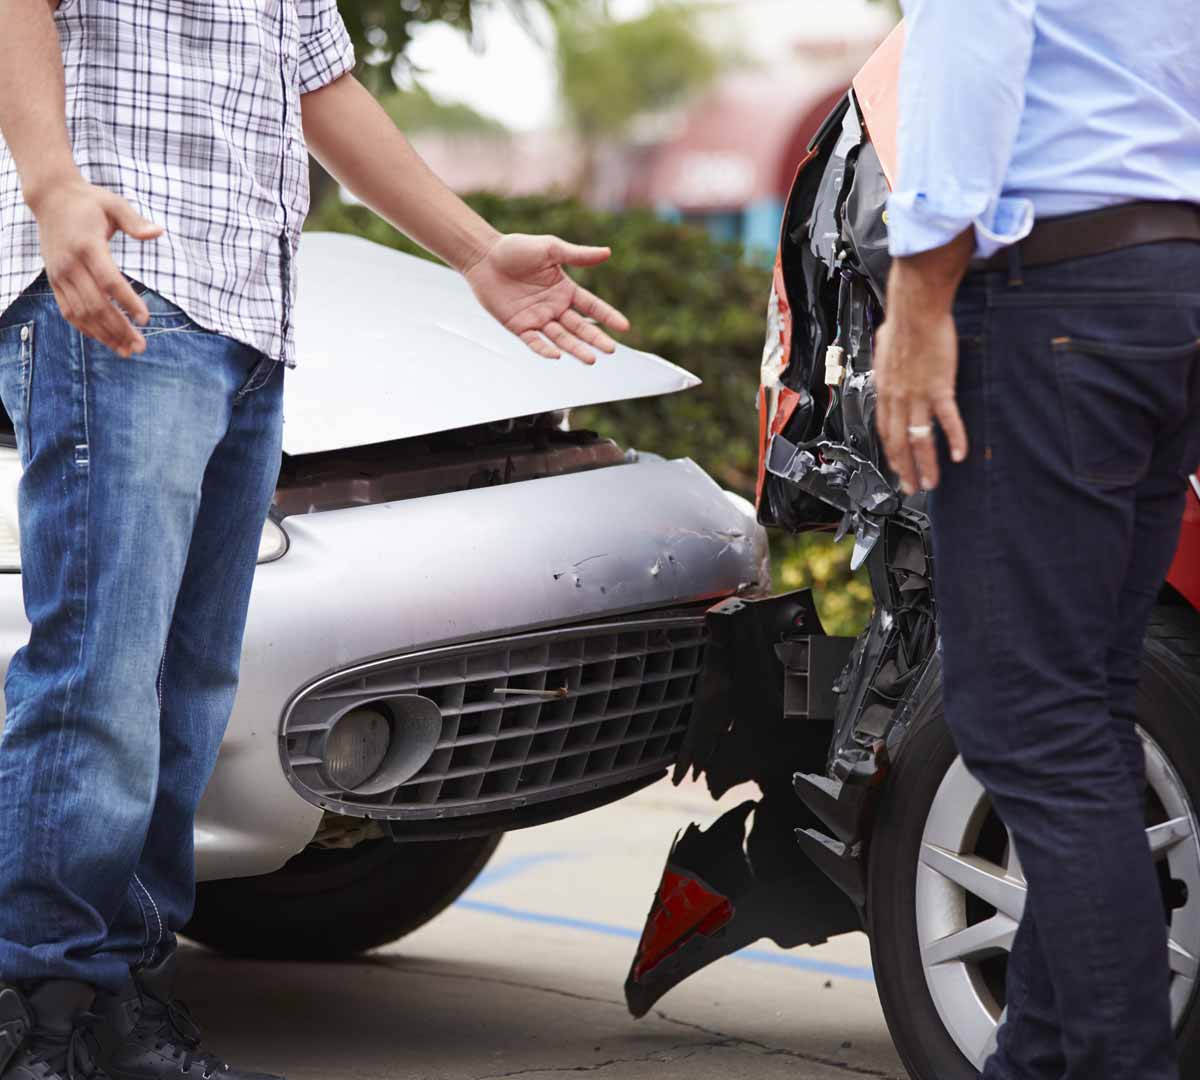 How To Choose The Best Car Accident Lawyer In Denver?